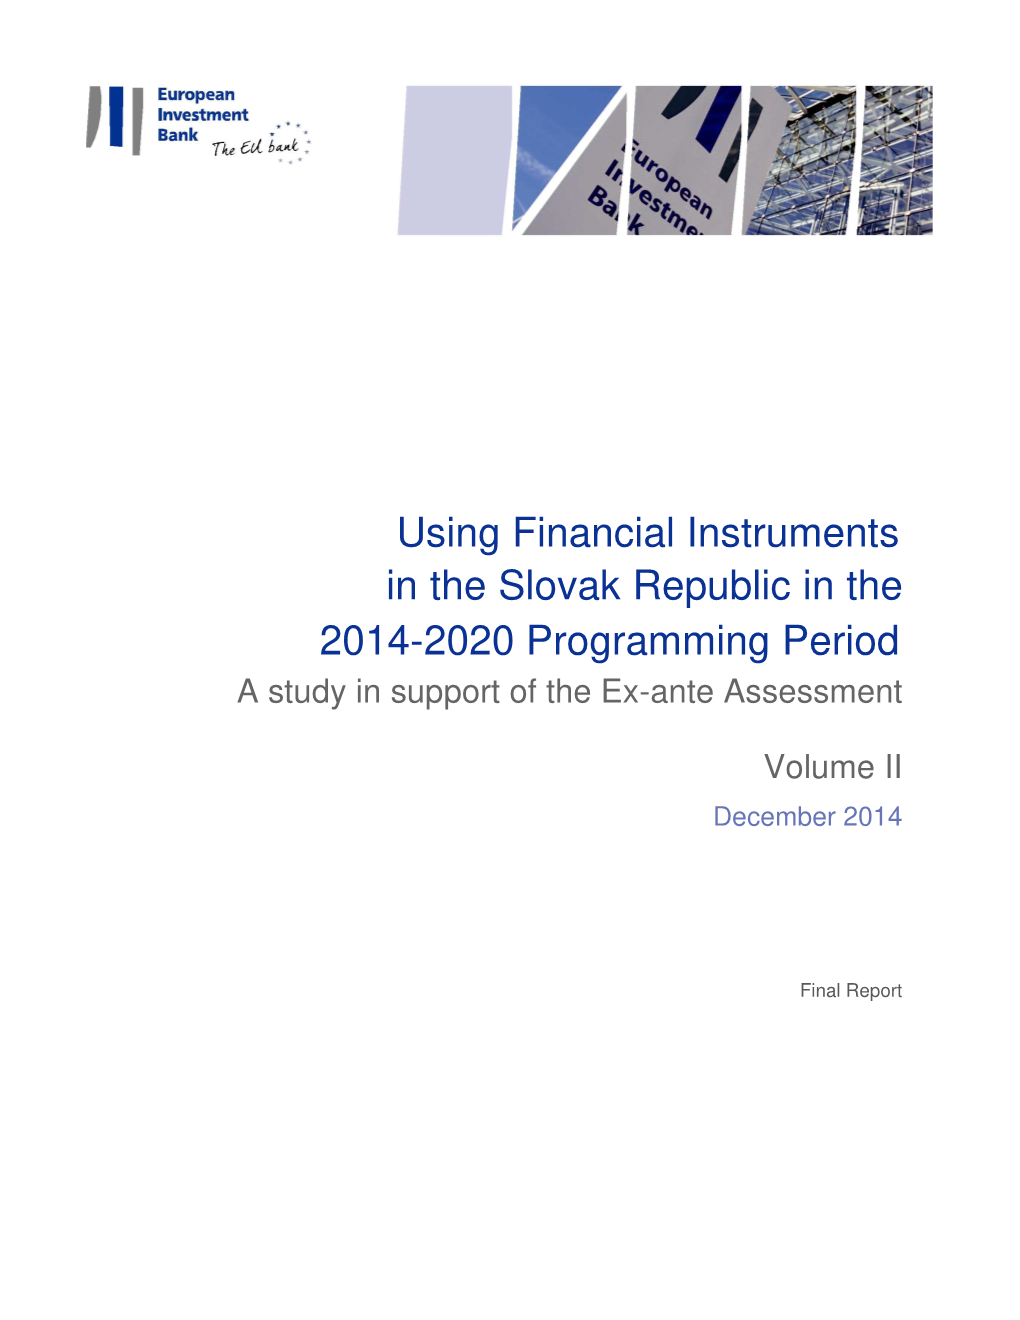 Using Financial Instruments in the Slovak Republic in the 2014-2020 Programming Period a Study in Support of the Ex-Ante Assessment